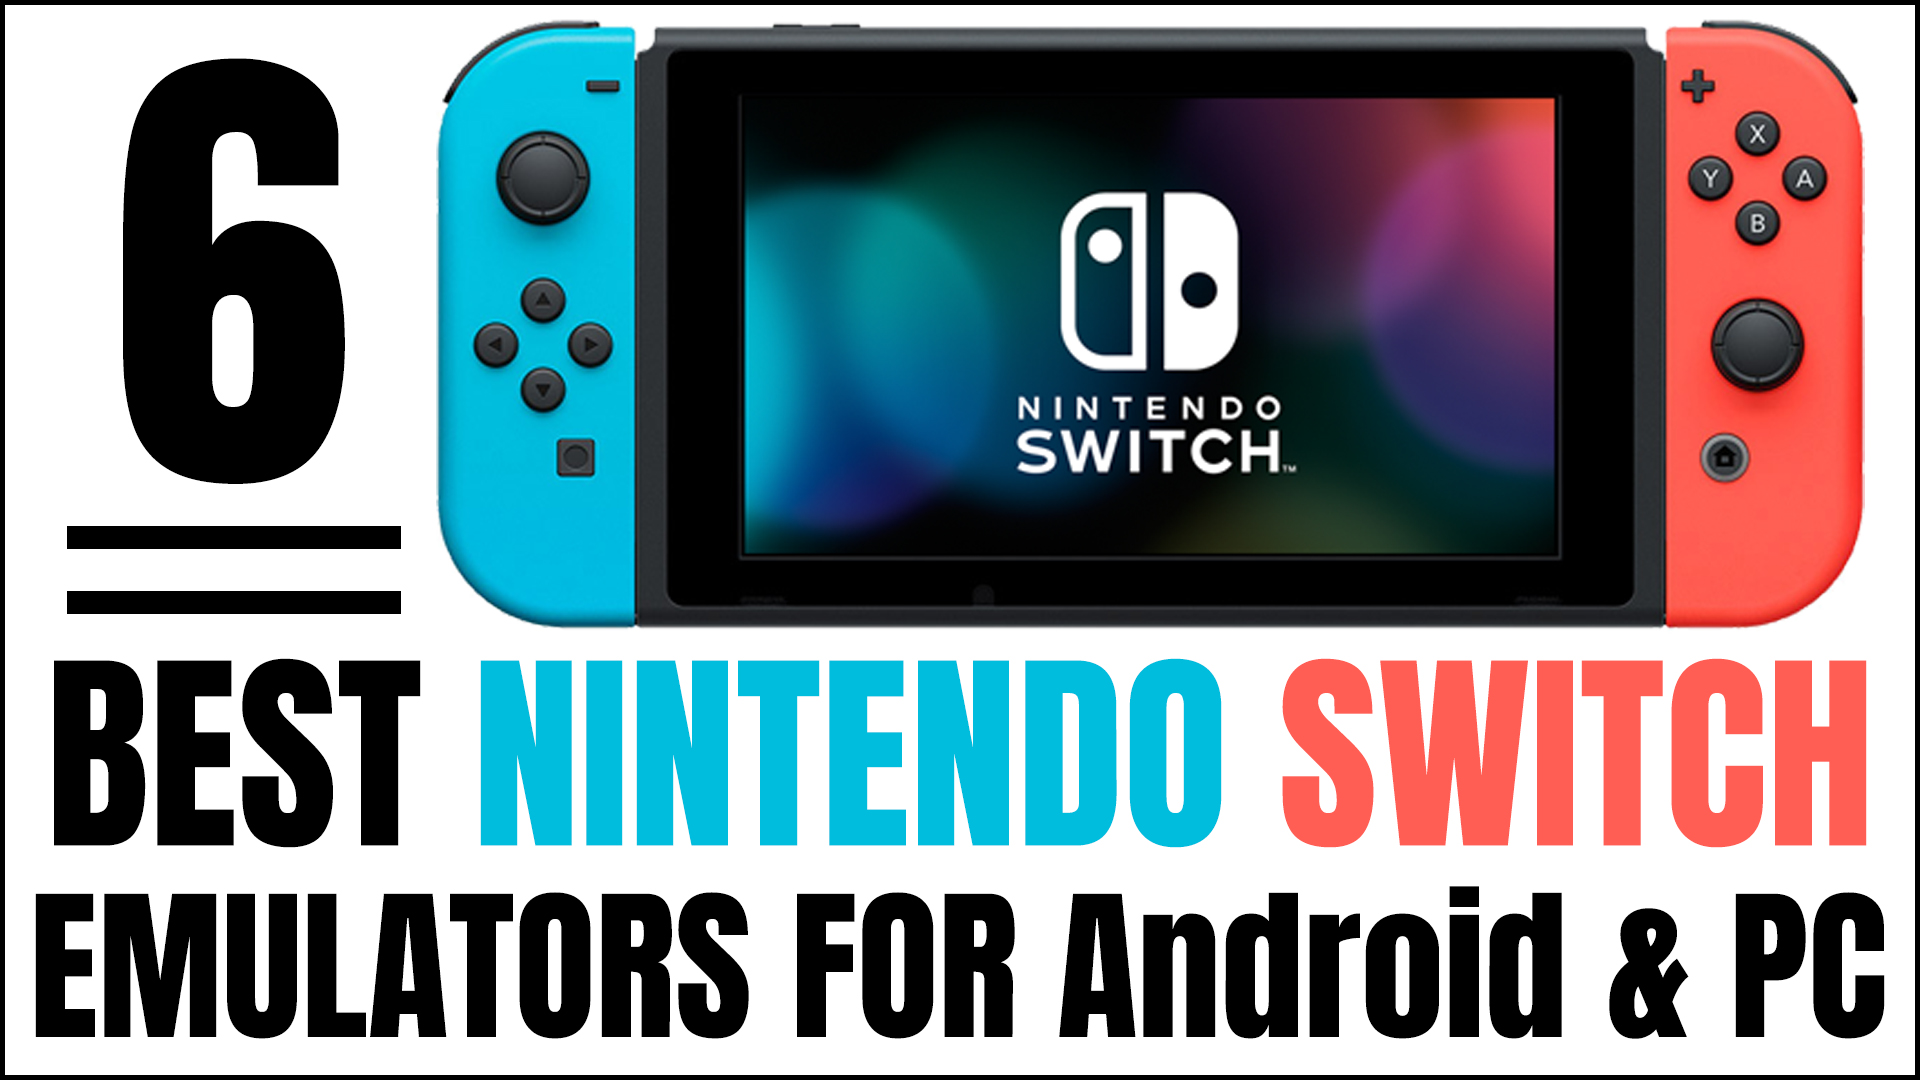 Best Nintendo Switch Emulators For Android and PC